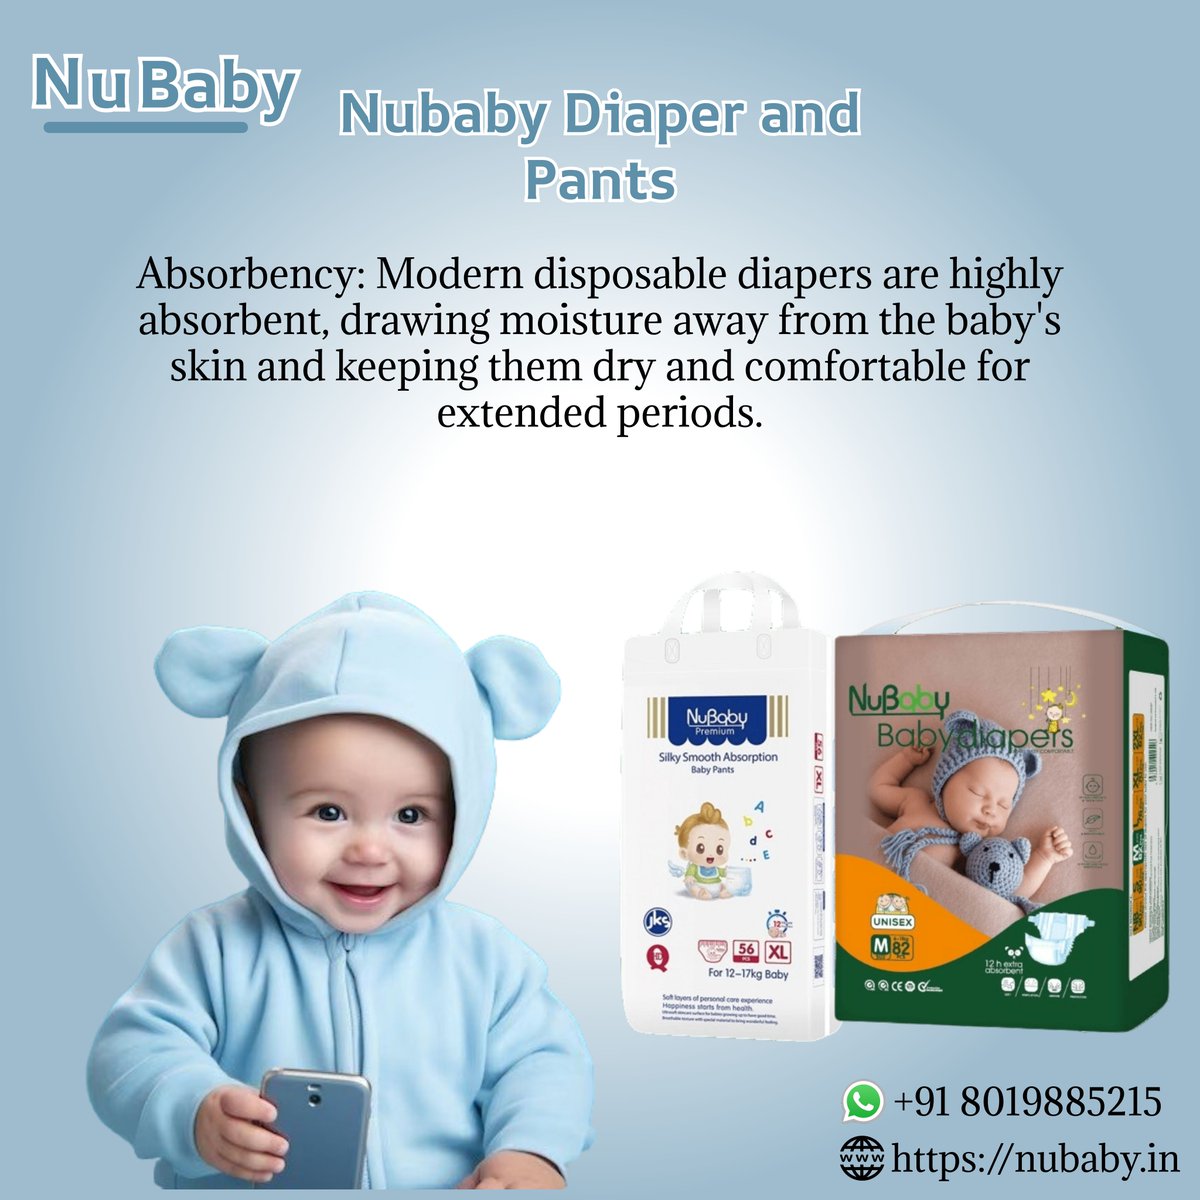 Nubaby diaper and pants absorbency.
#diaperchallenge #diaperbag #diapergirl #pants #family #love #care #health #nubaby #diaperandpants #diaper #diaper #diapers #pants #babyneeds #babydiapers #pantsstyl #ComfortableSleep #babyplaytime #babyfuntime #babygirlstyle #production